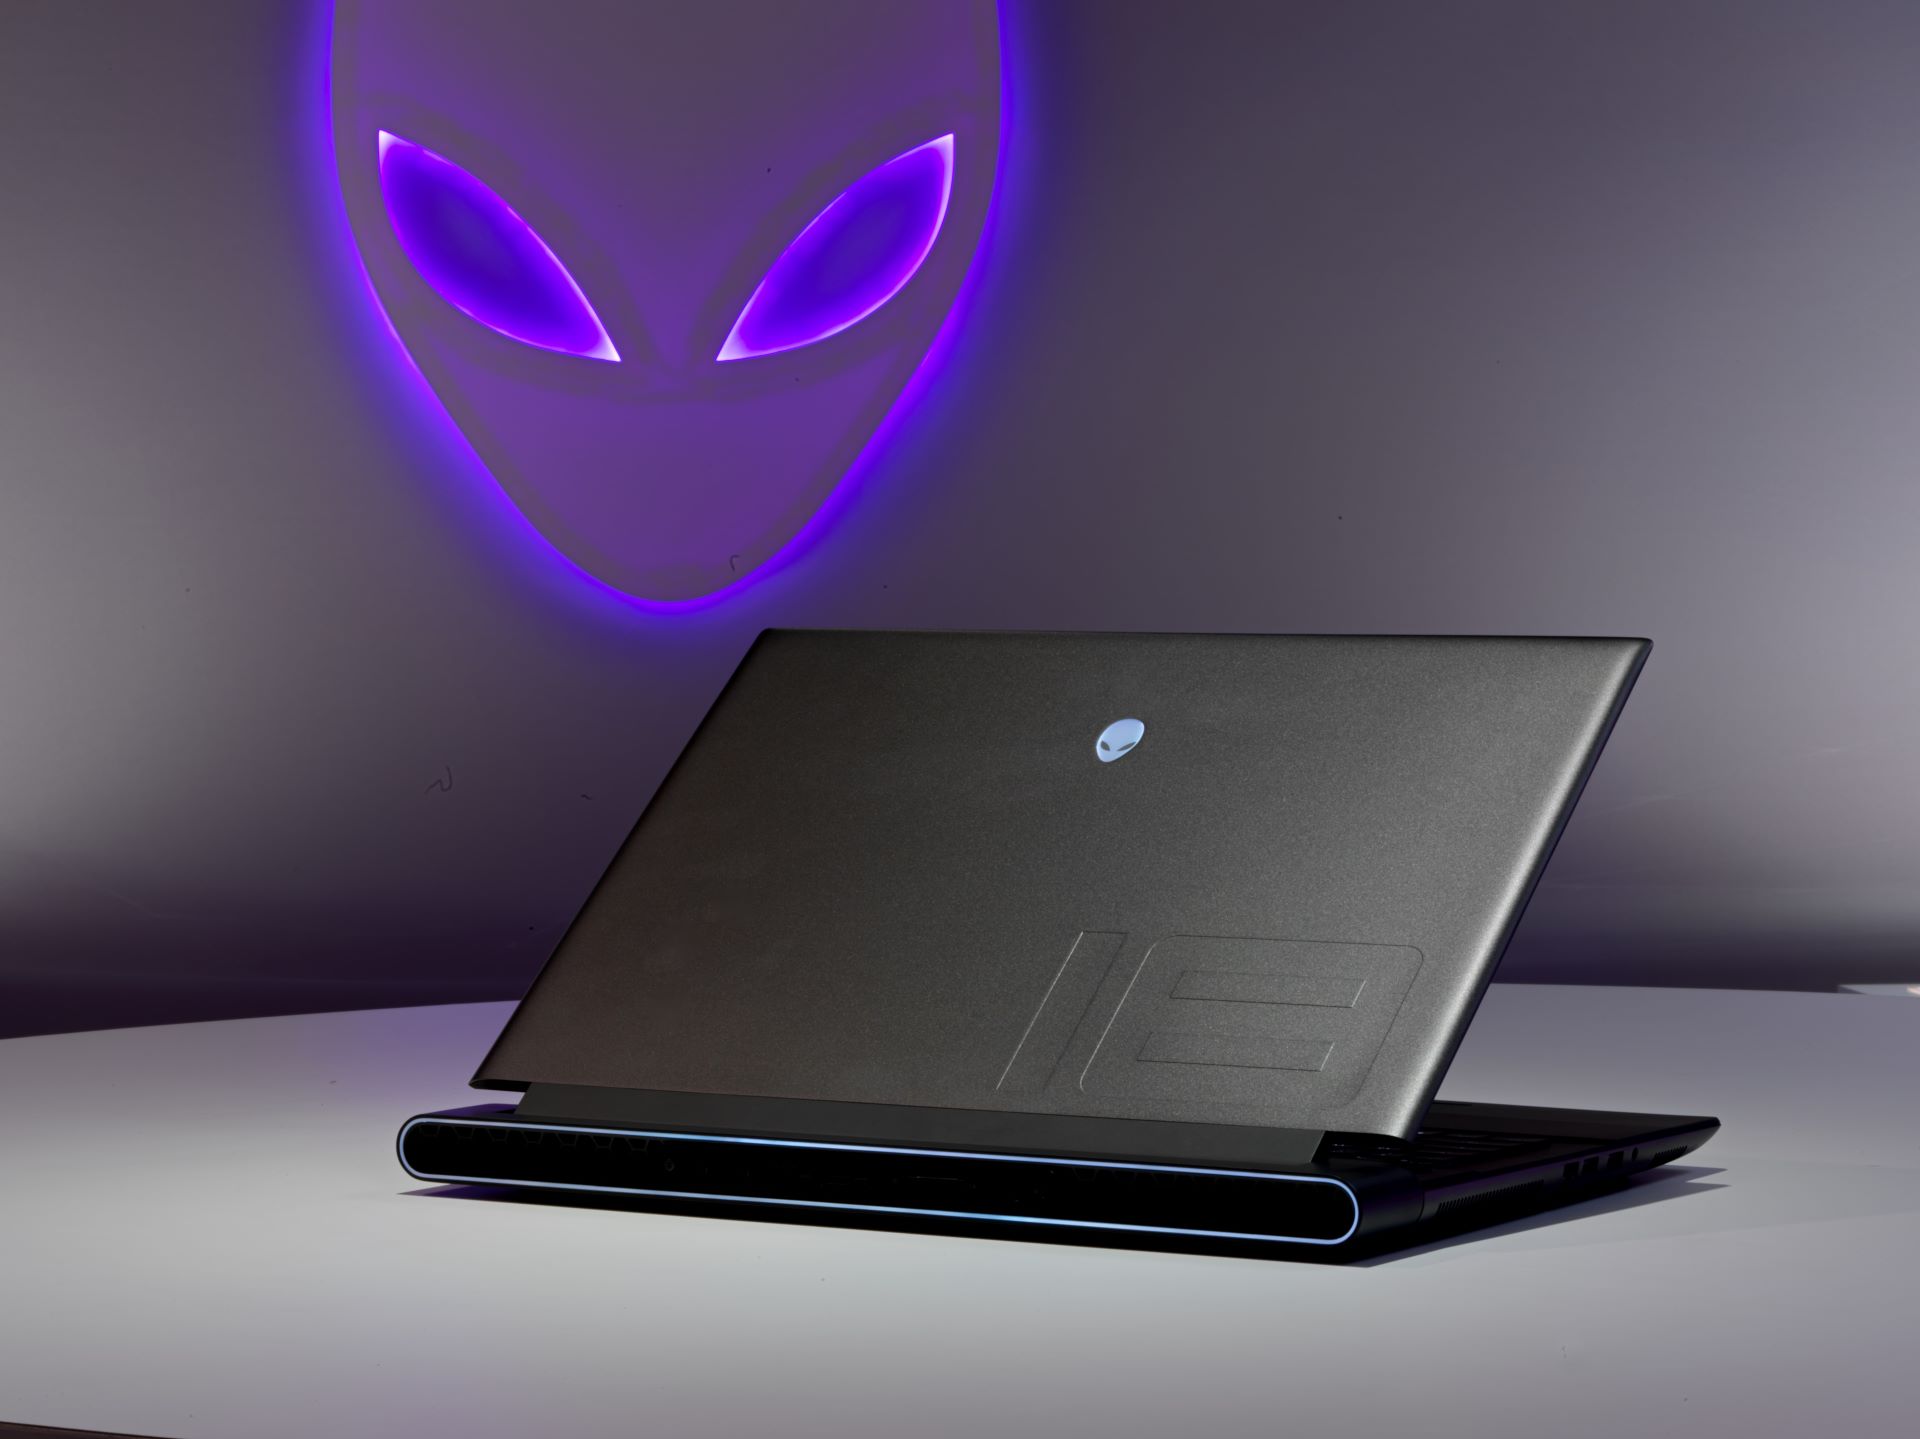 DELL G15 Review - The More Affordable Alienware! 